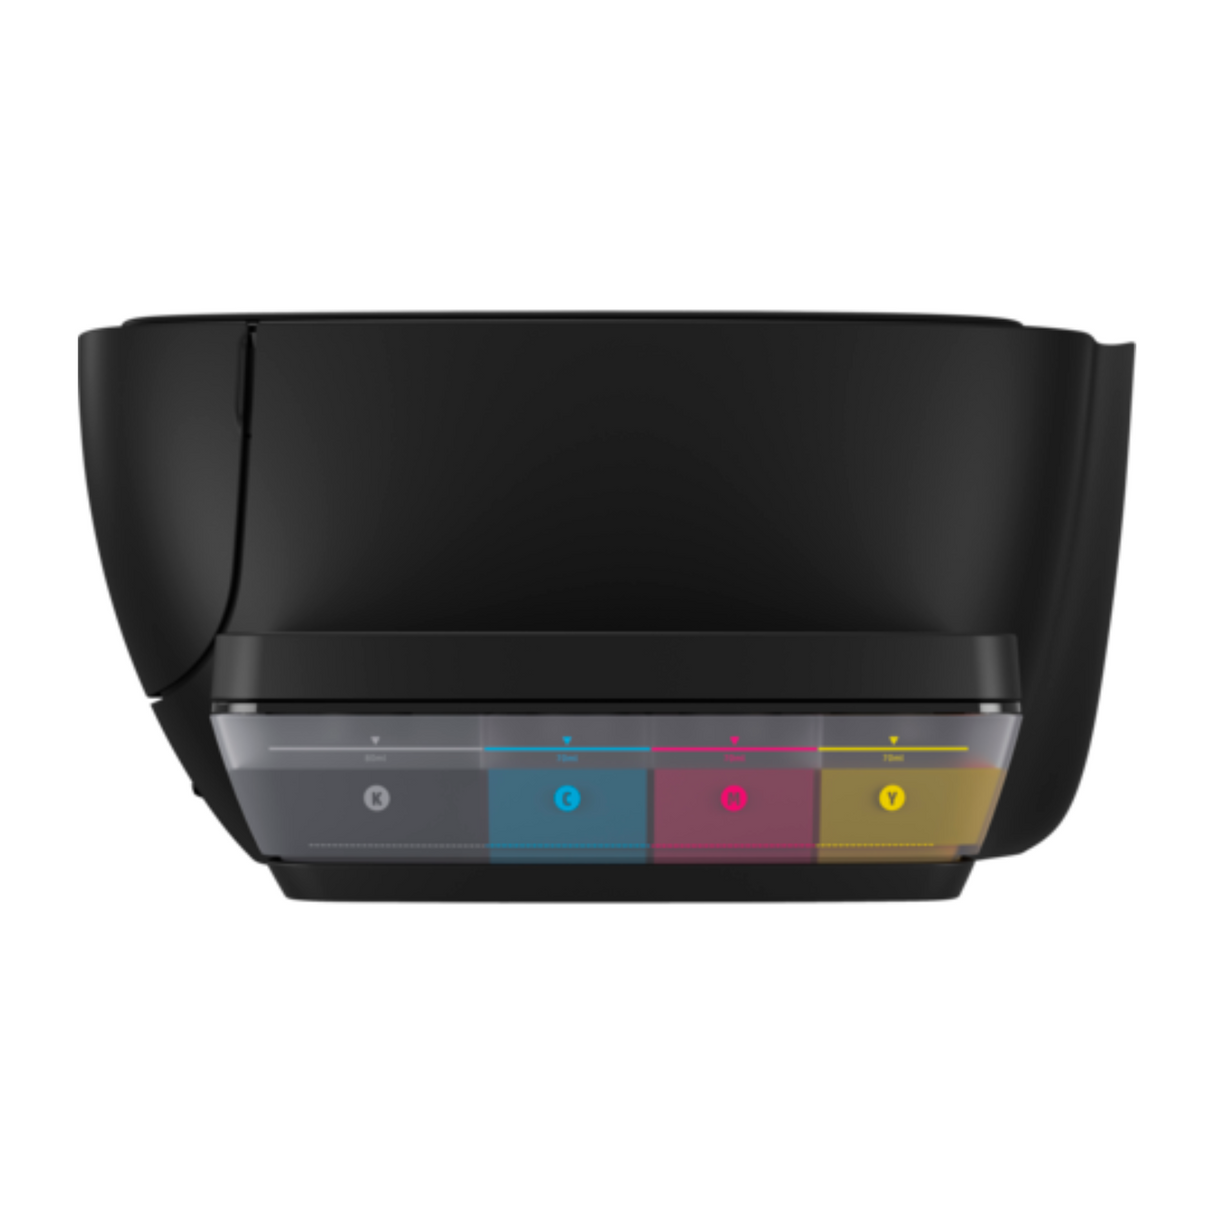 HP Ink Tank 315 All-In-One CISS Printer Z4B04A